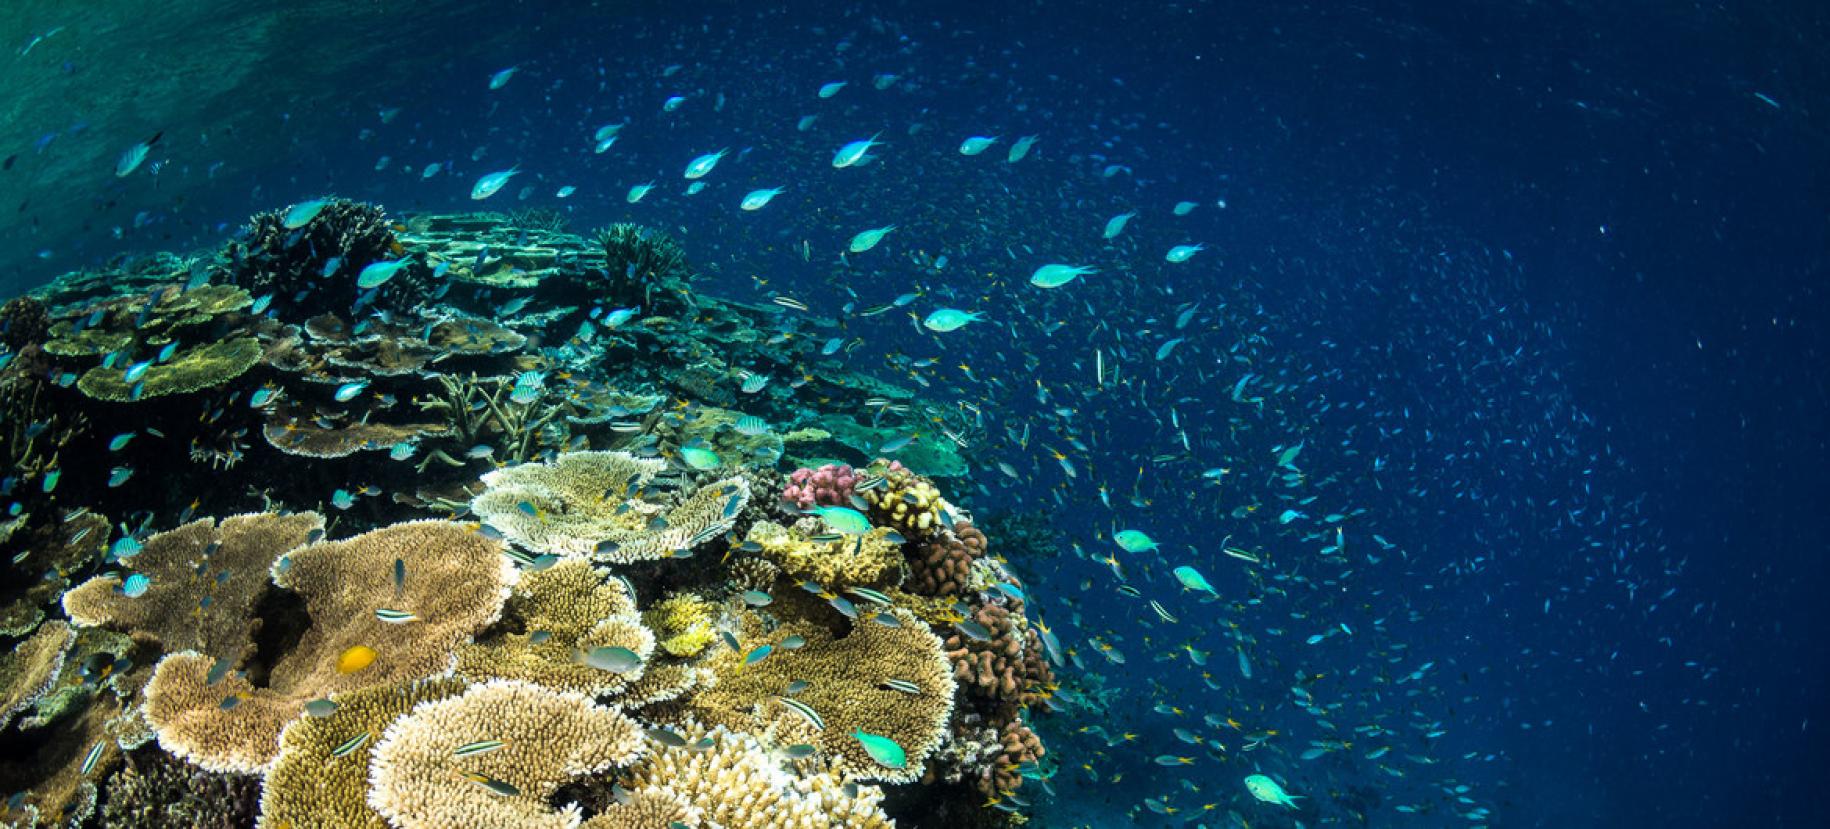 A close look at the Great Barrier Reef in Australia.